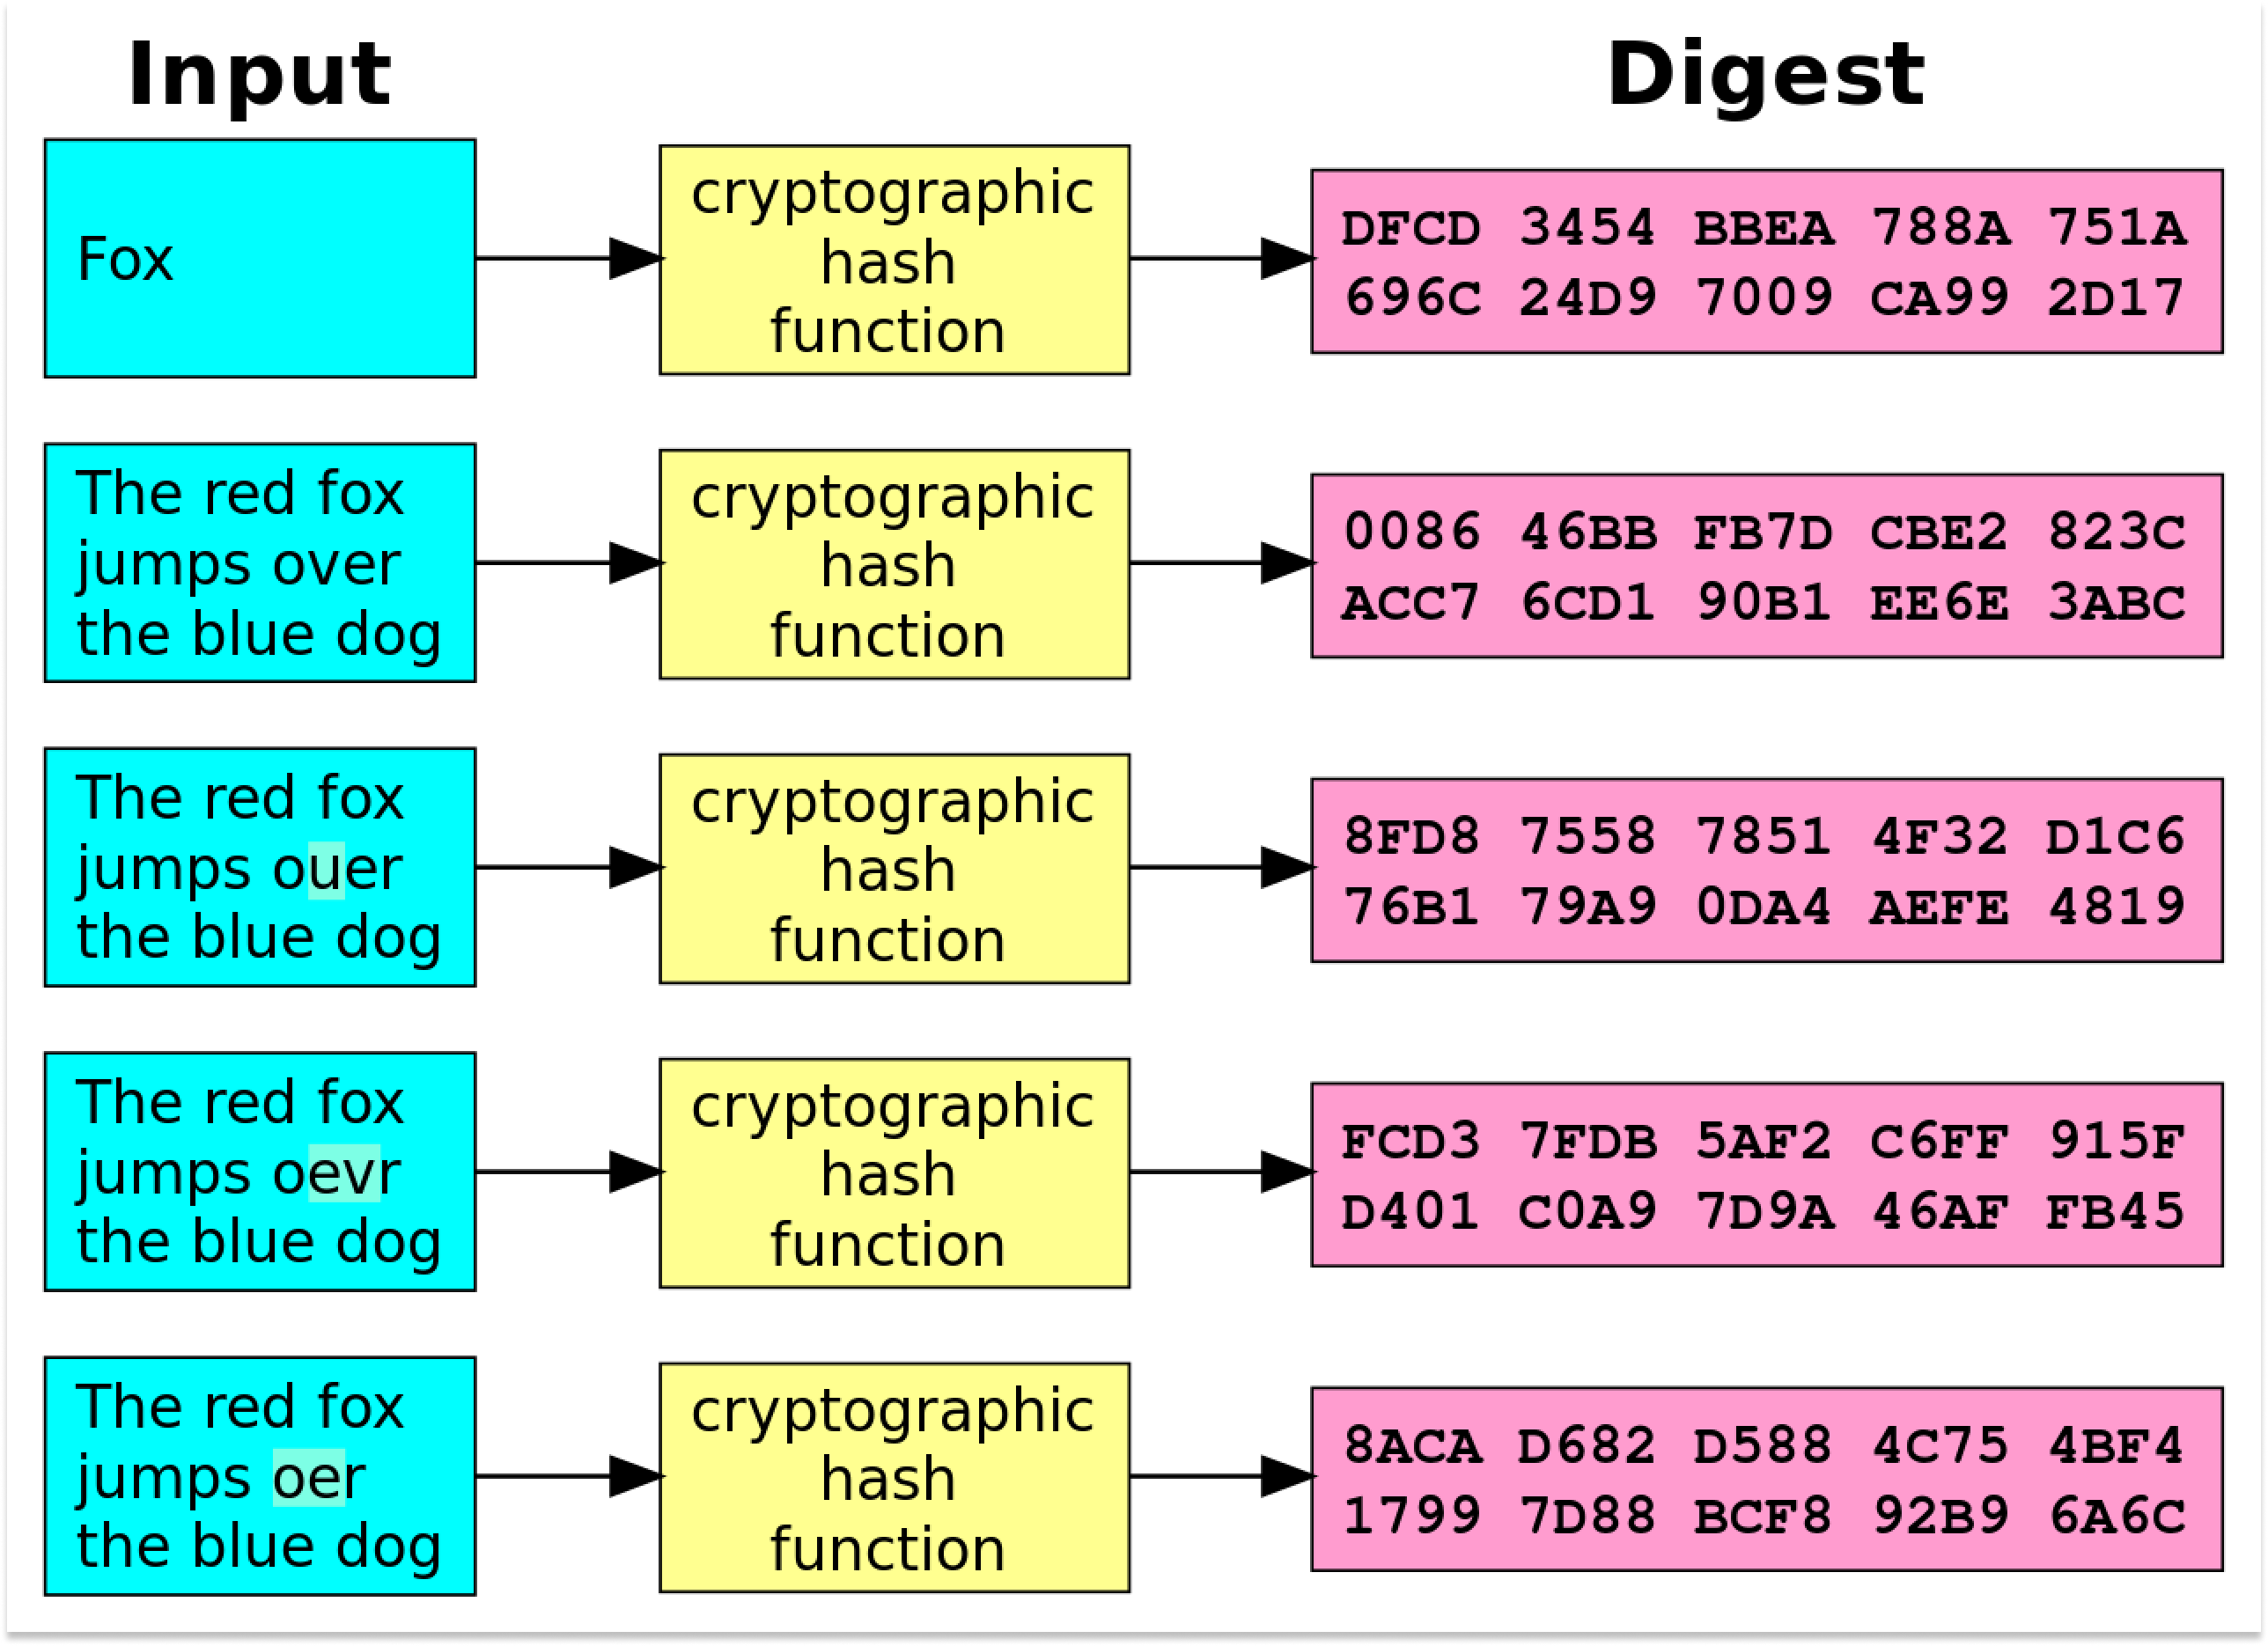 Cryptographic Hash Functions